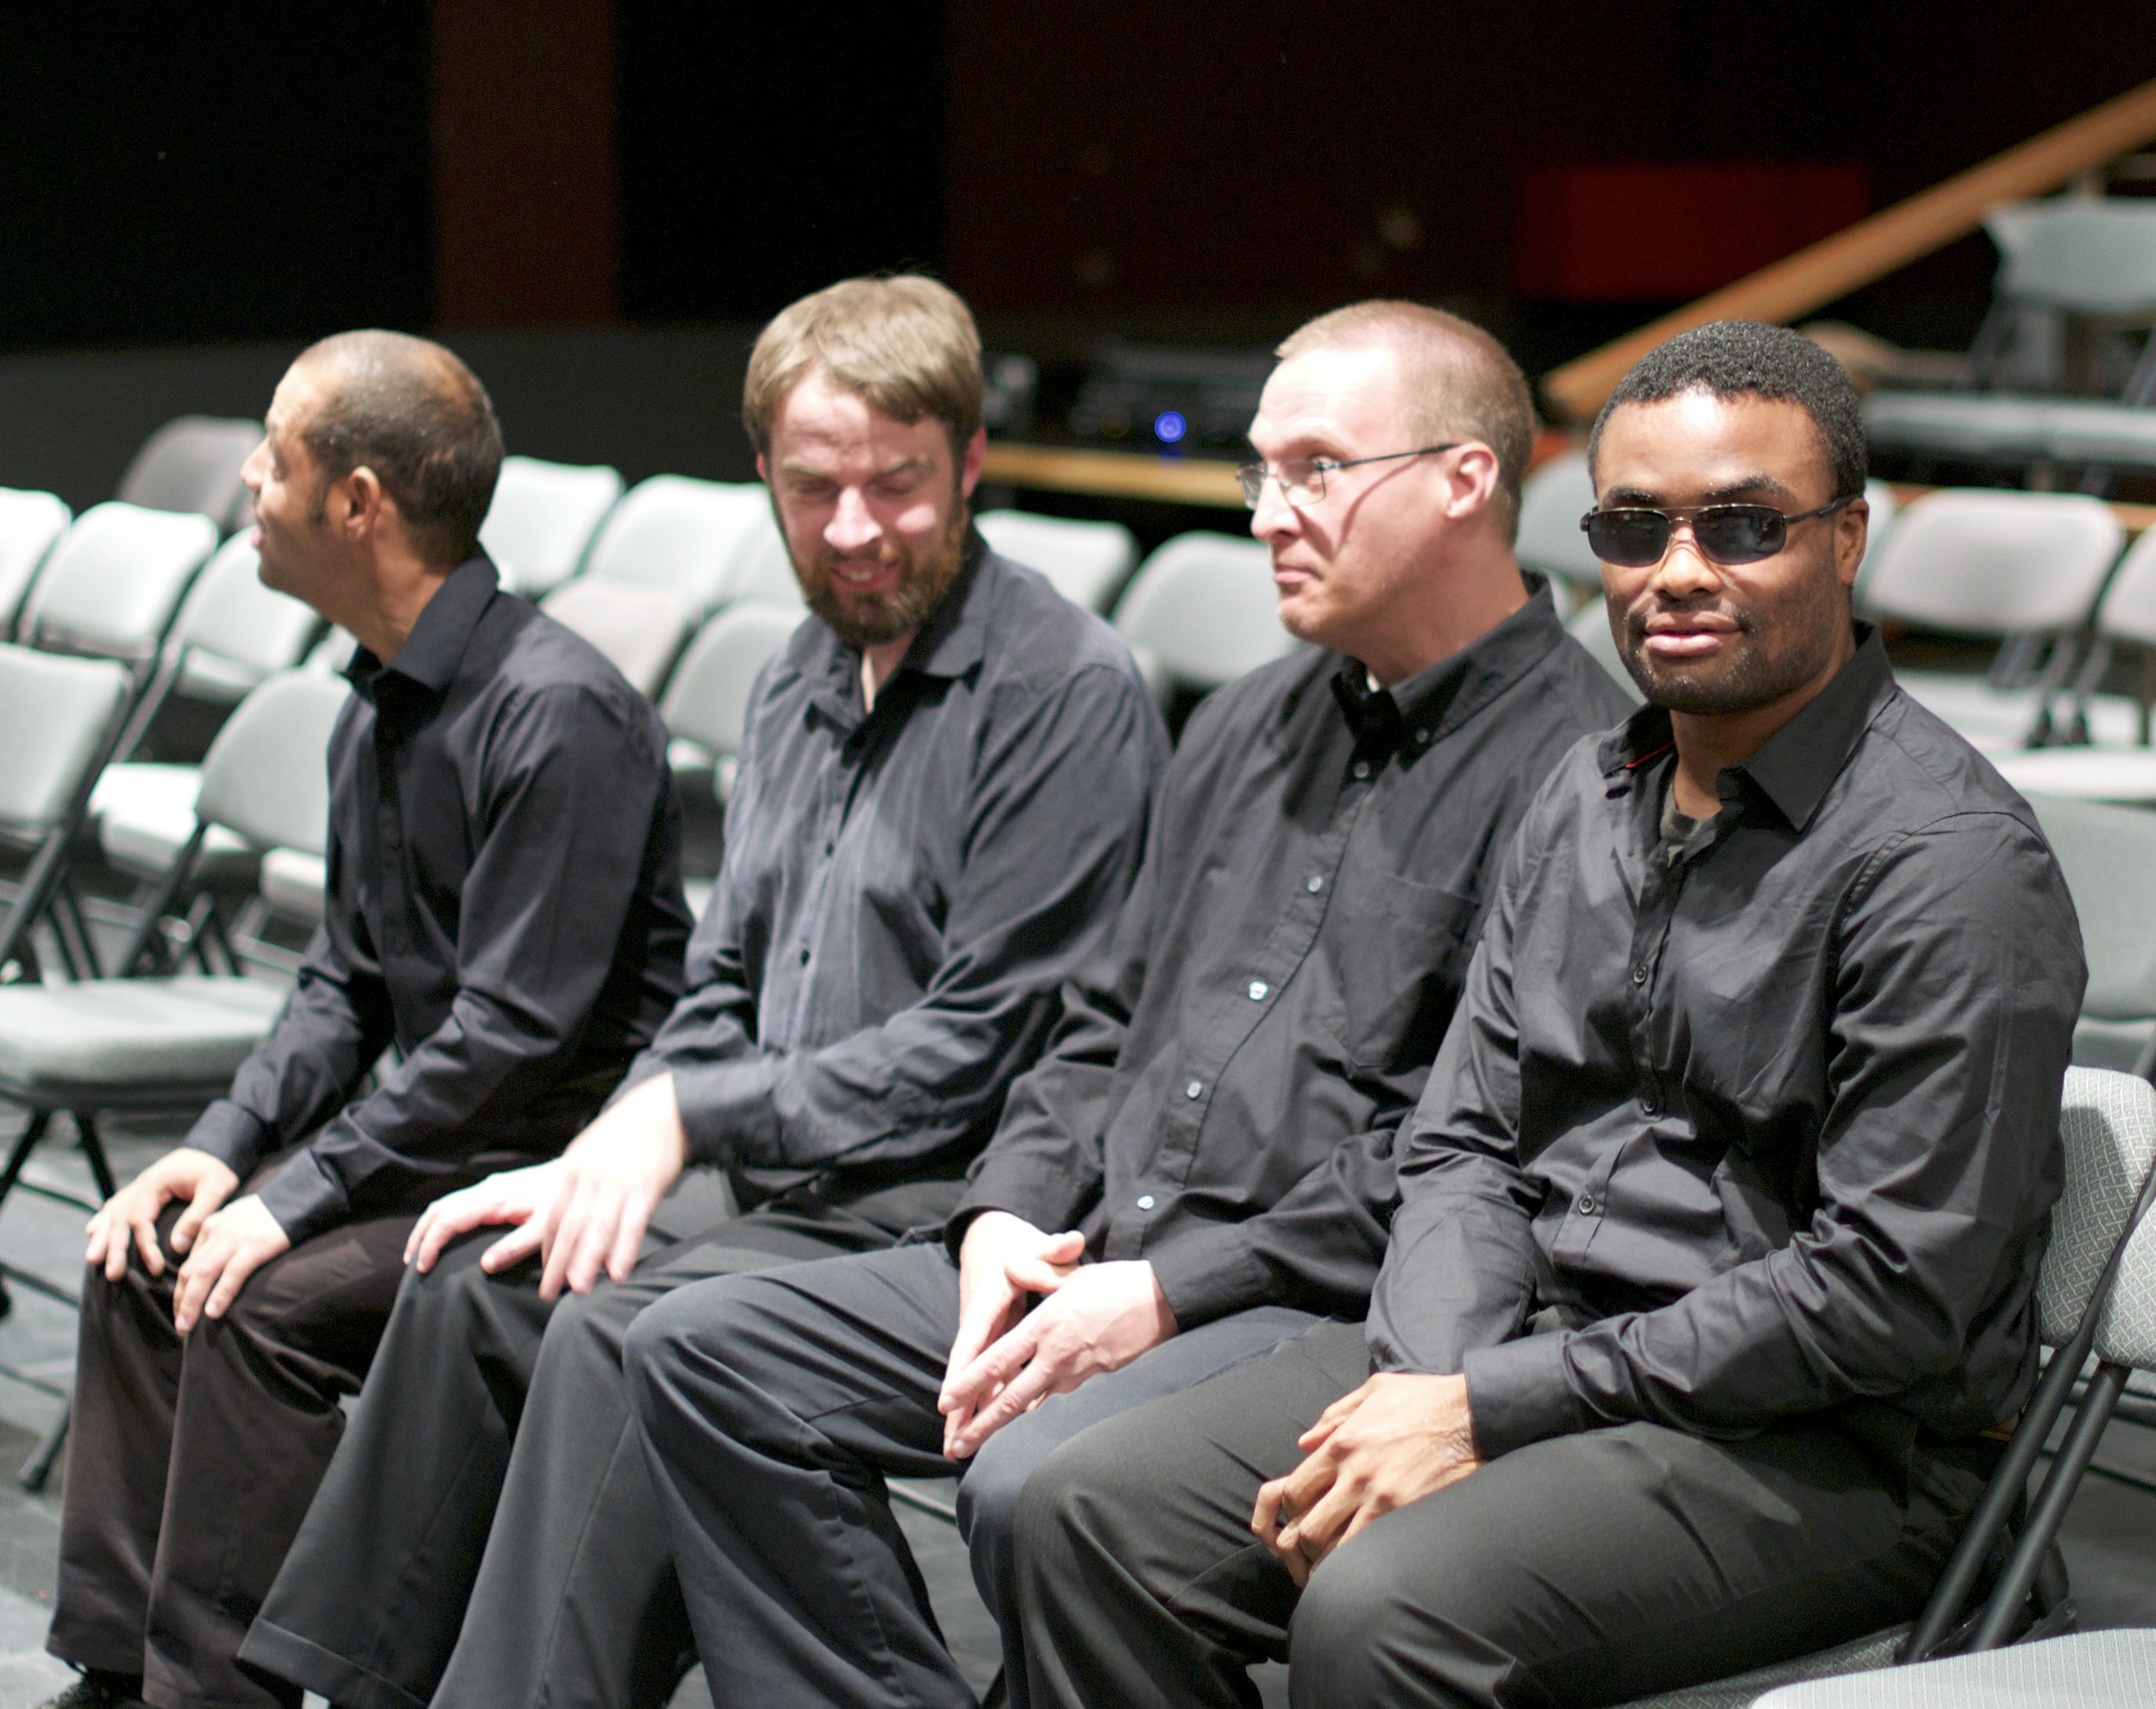 Four men sitting in folding chairs, wearing all black